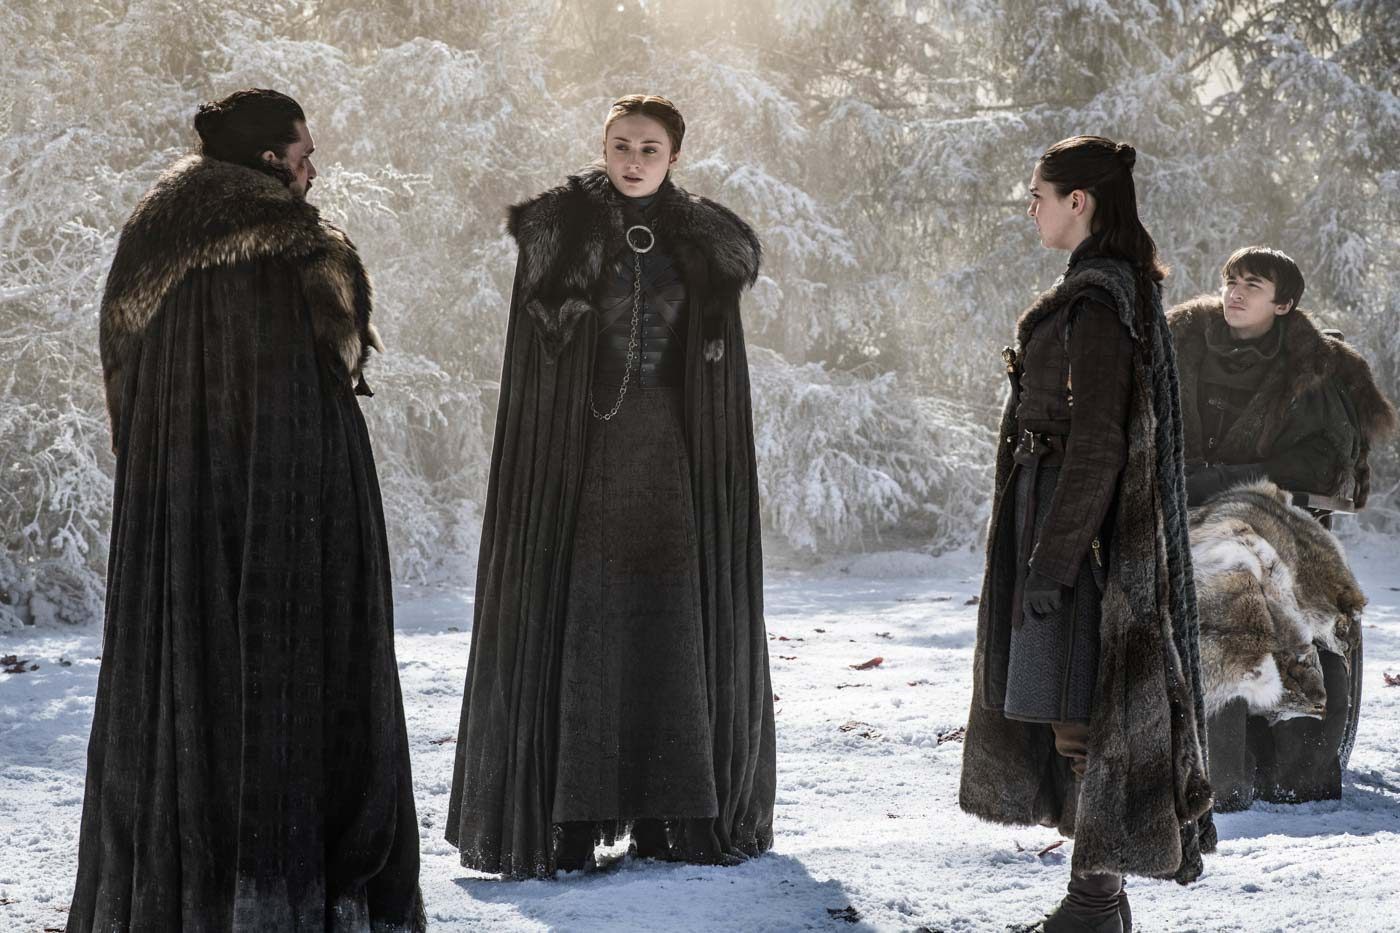 Here’s what happened to the Starks in ‘The Iron Throne’